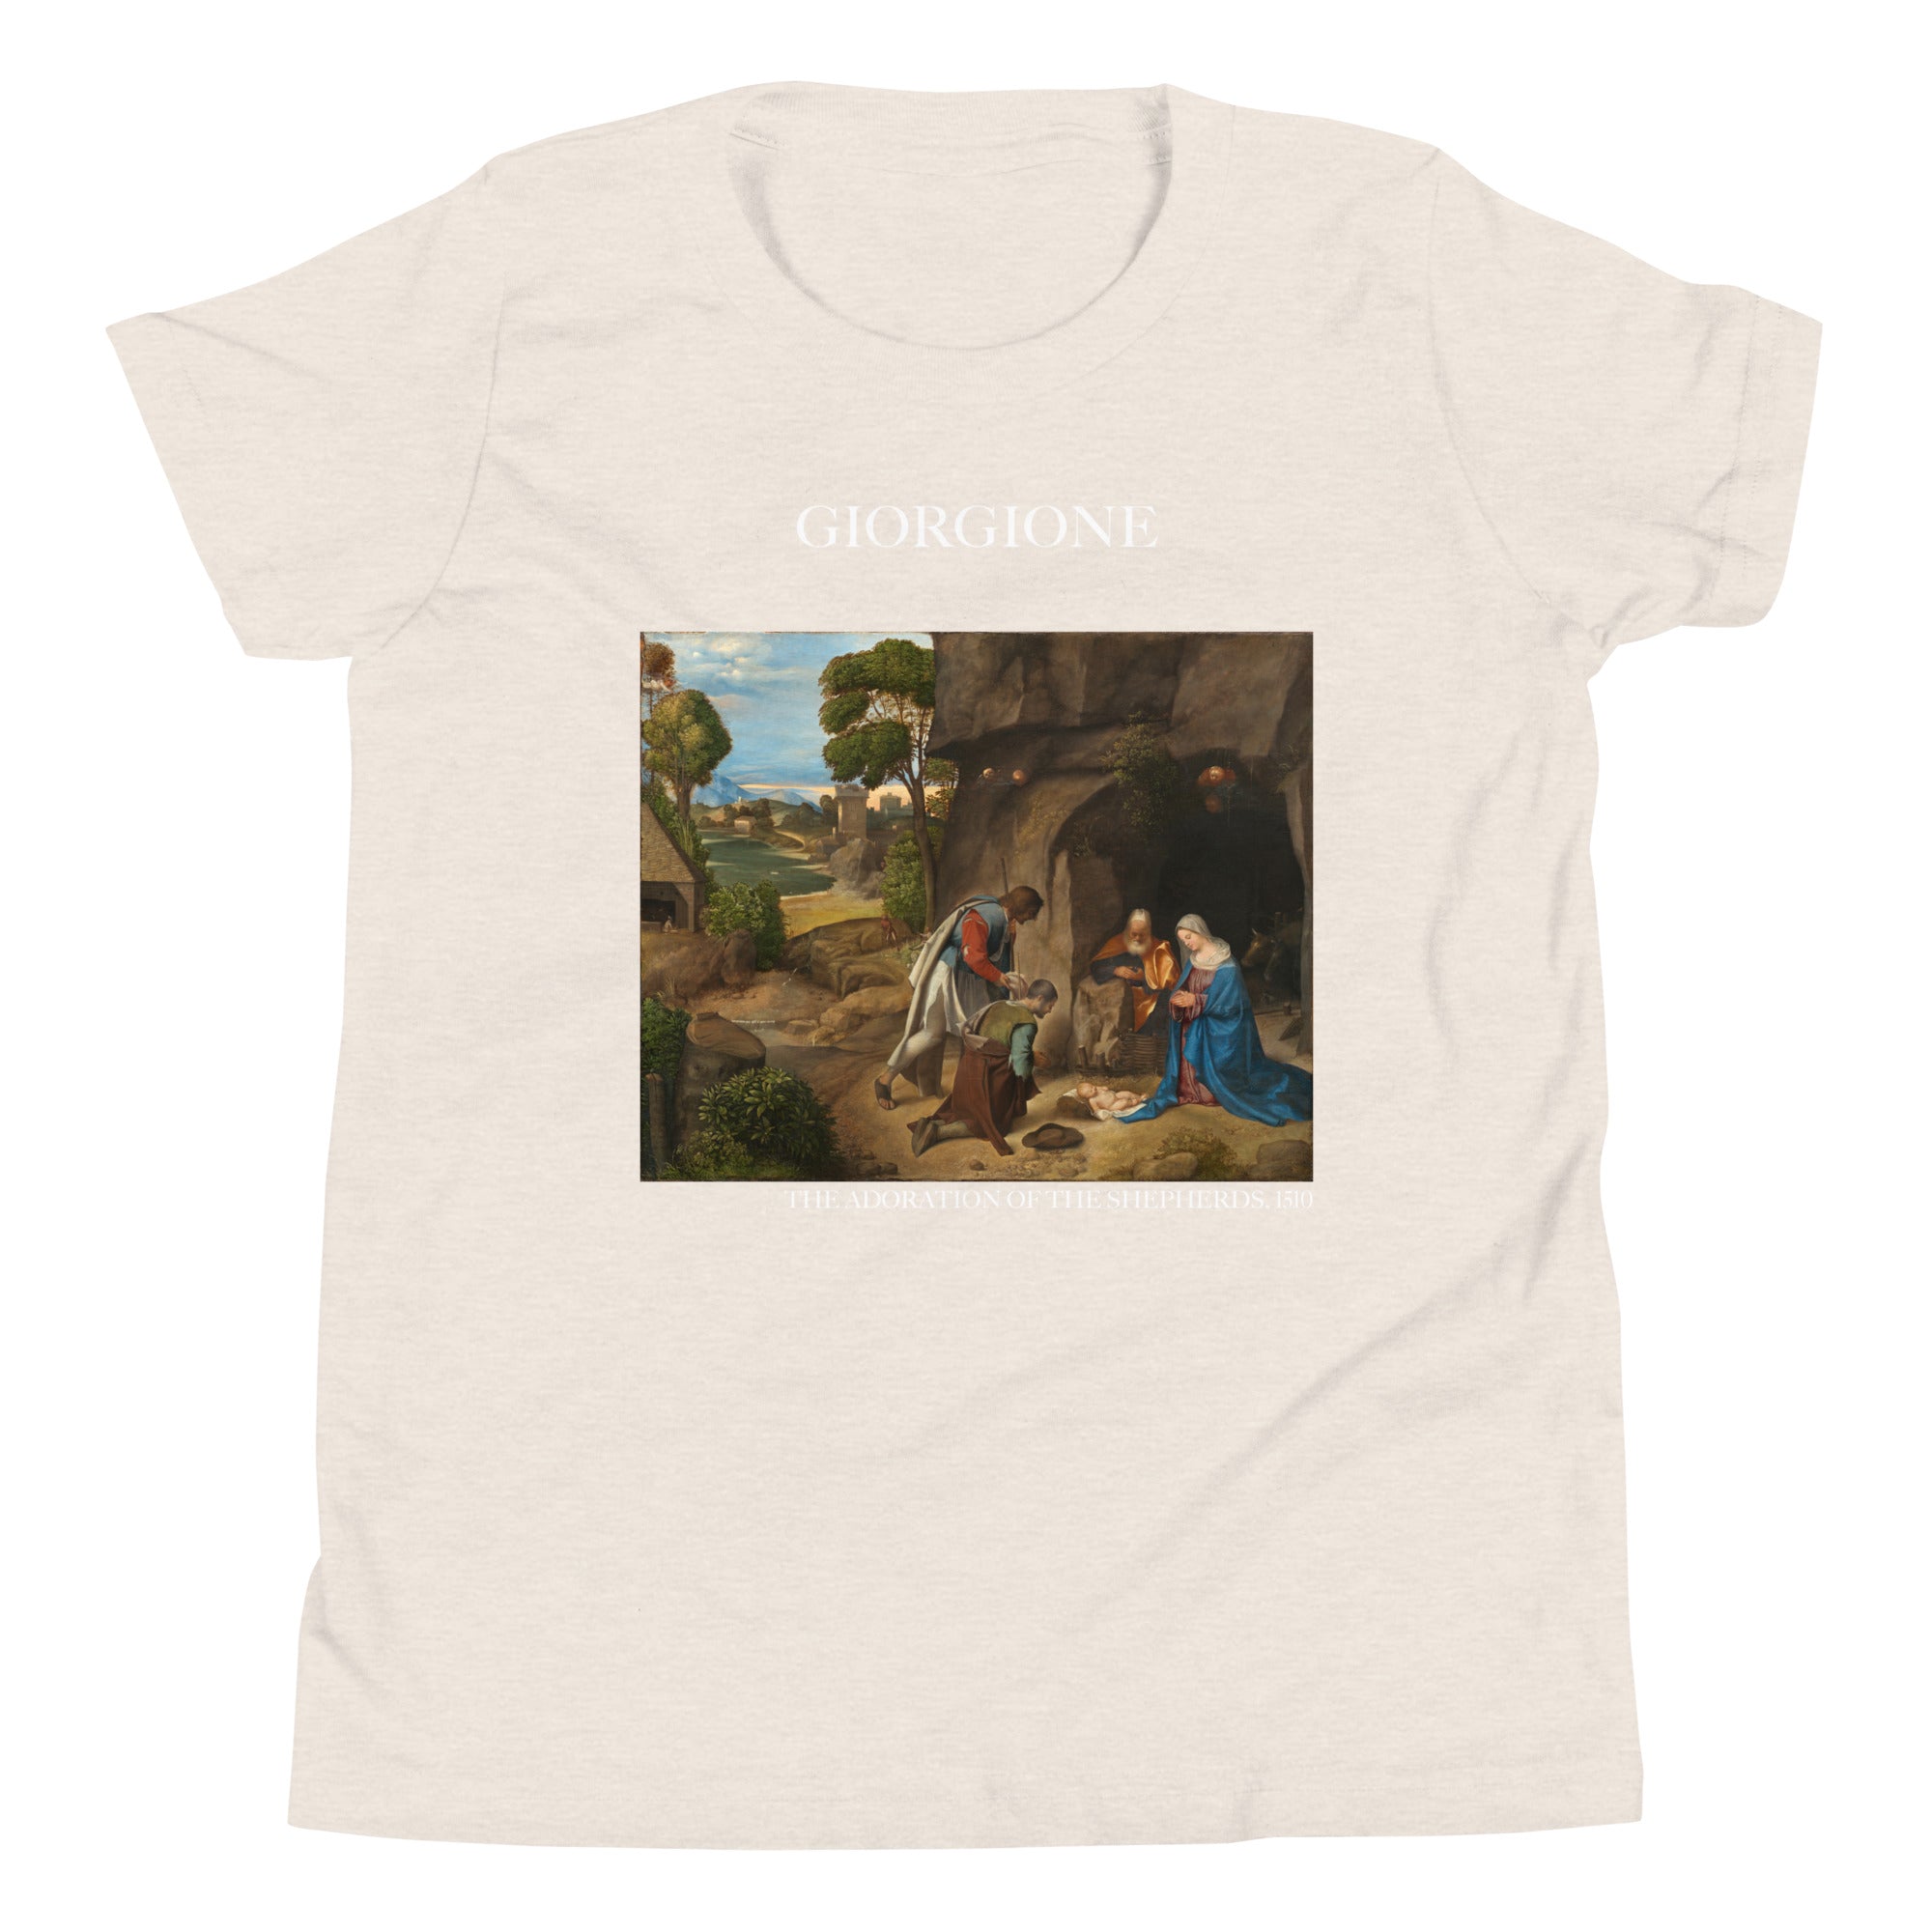 Giorgione 'The Adoration of the Shepherds' Famous Painting Short Sleeve T-Shirt | Premium Youth Art Tee